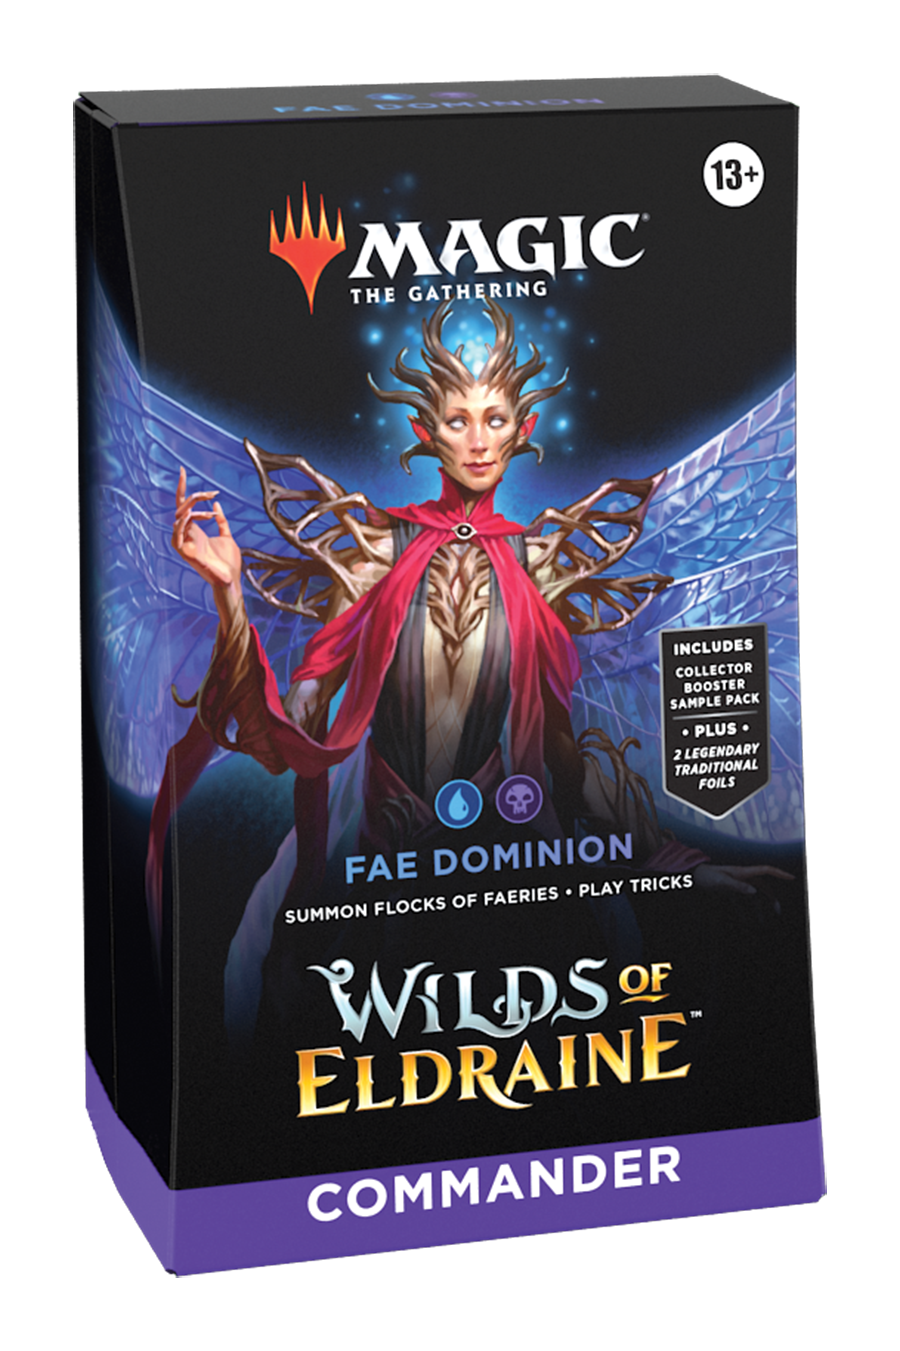 Magic the Gathering: Wilds of Eldraine Commander Deck - Fae Dominion product image.